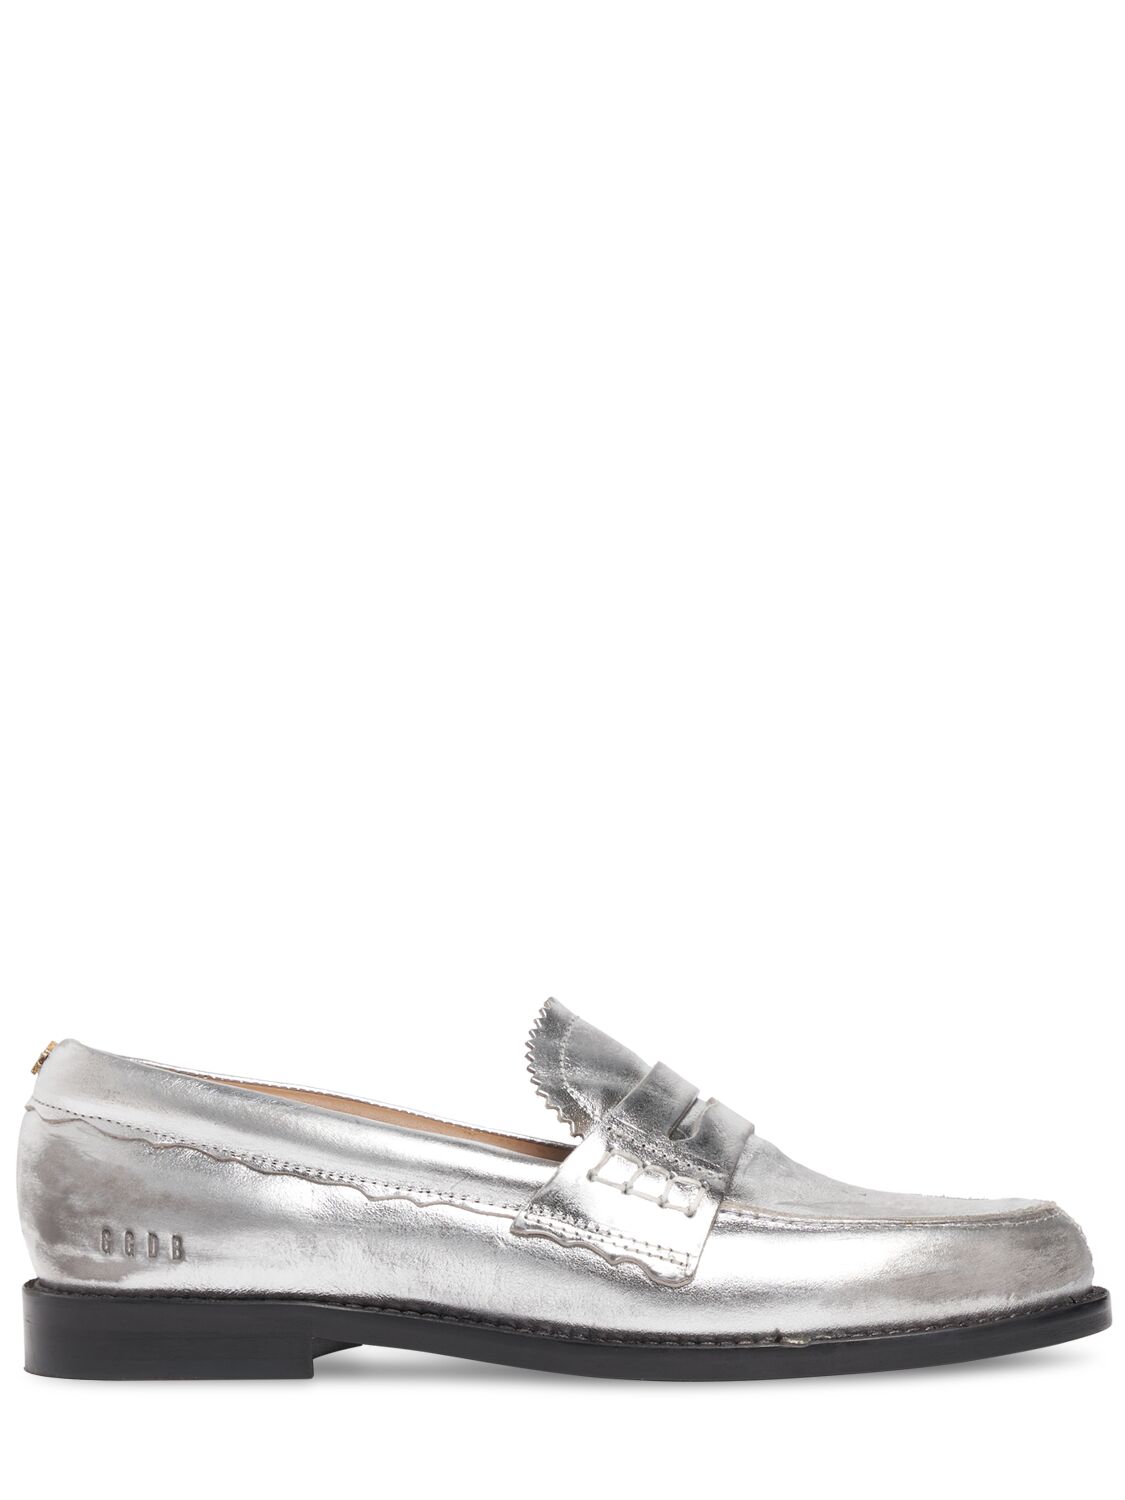 Golden Goose 20mm Jerry Metallic Leather Loafers In Silver